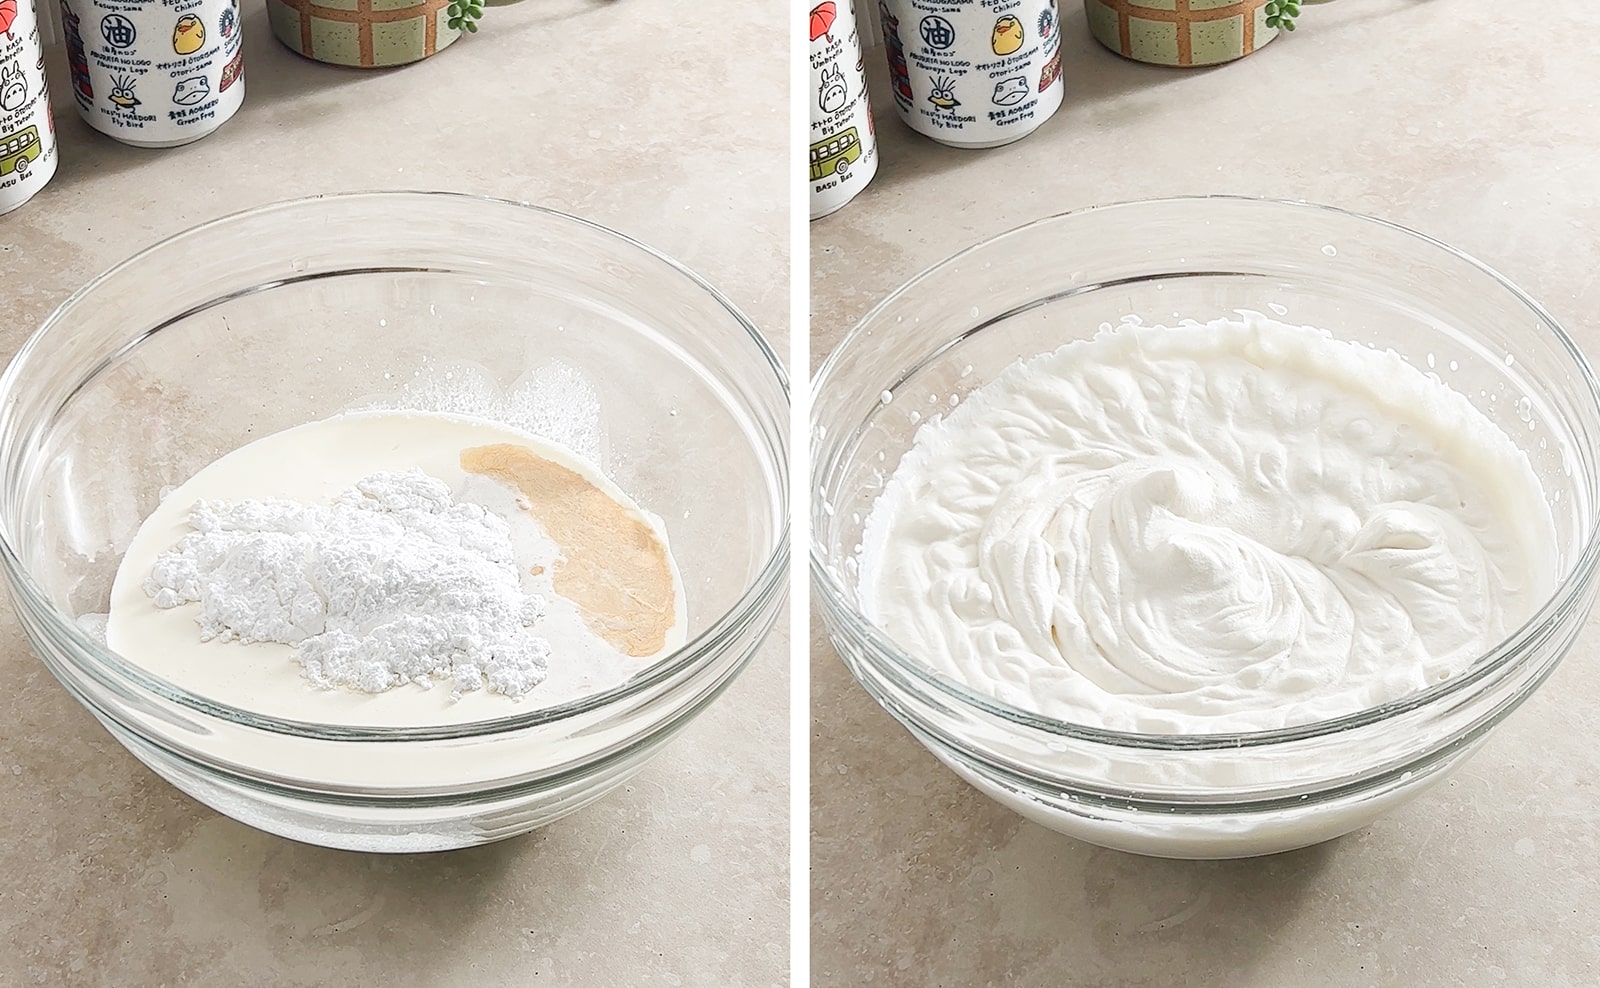 Left to right: ingredients for whipped cream in a bowl, bowl of whipped cream.